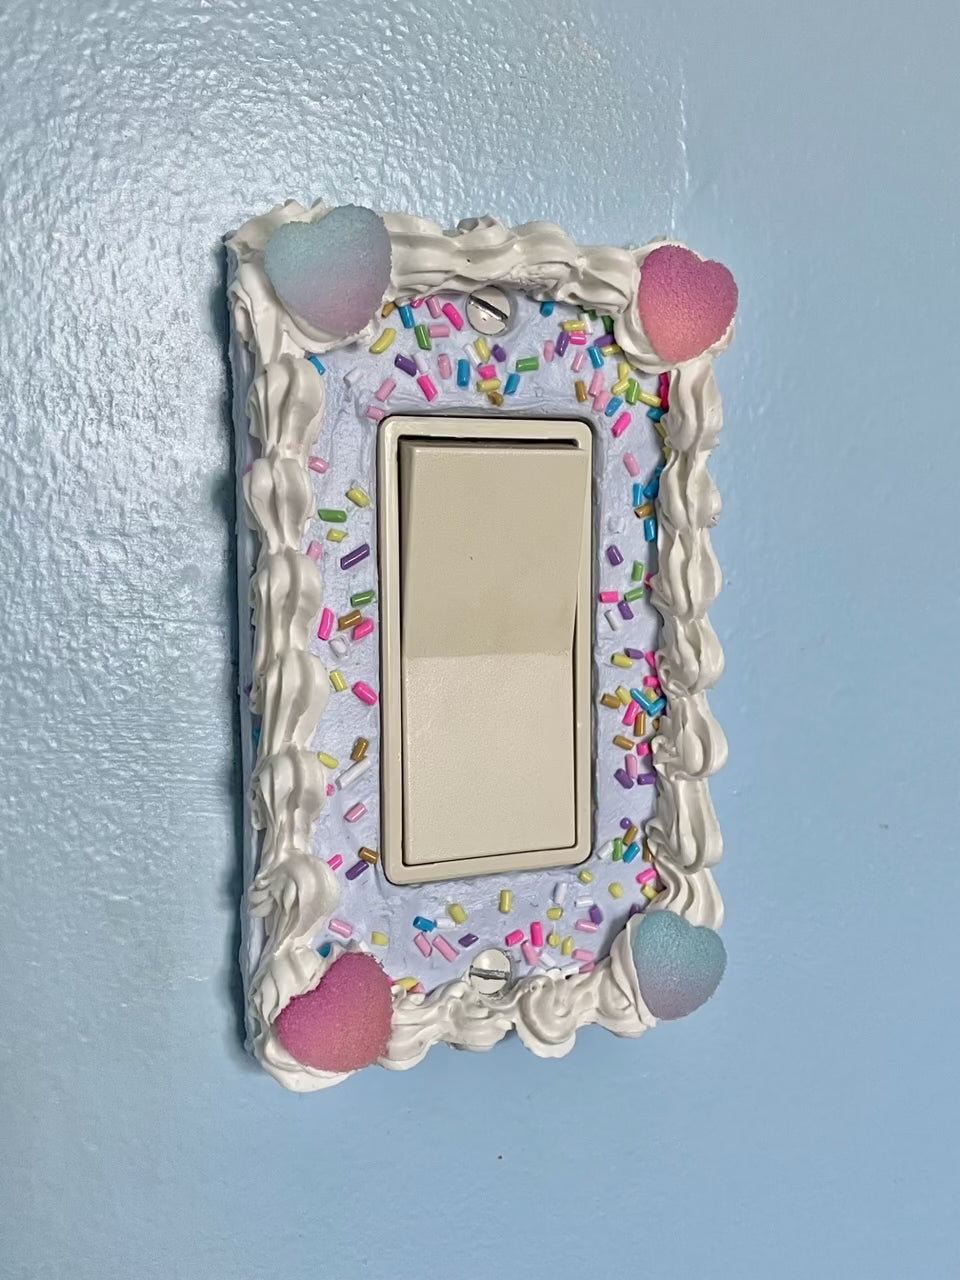 a light switch with a light switch plate decorated to look like a blue cake with sprinkles and candy hearts